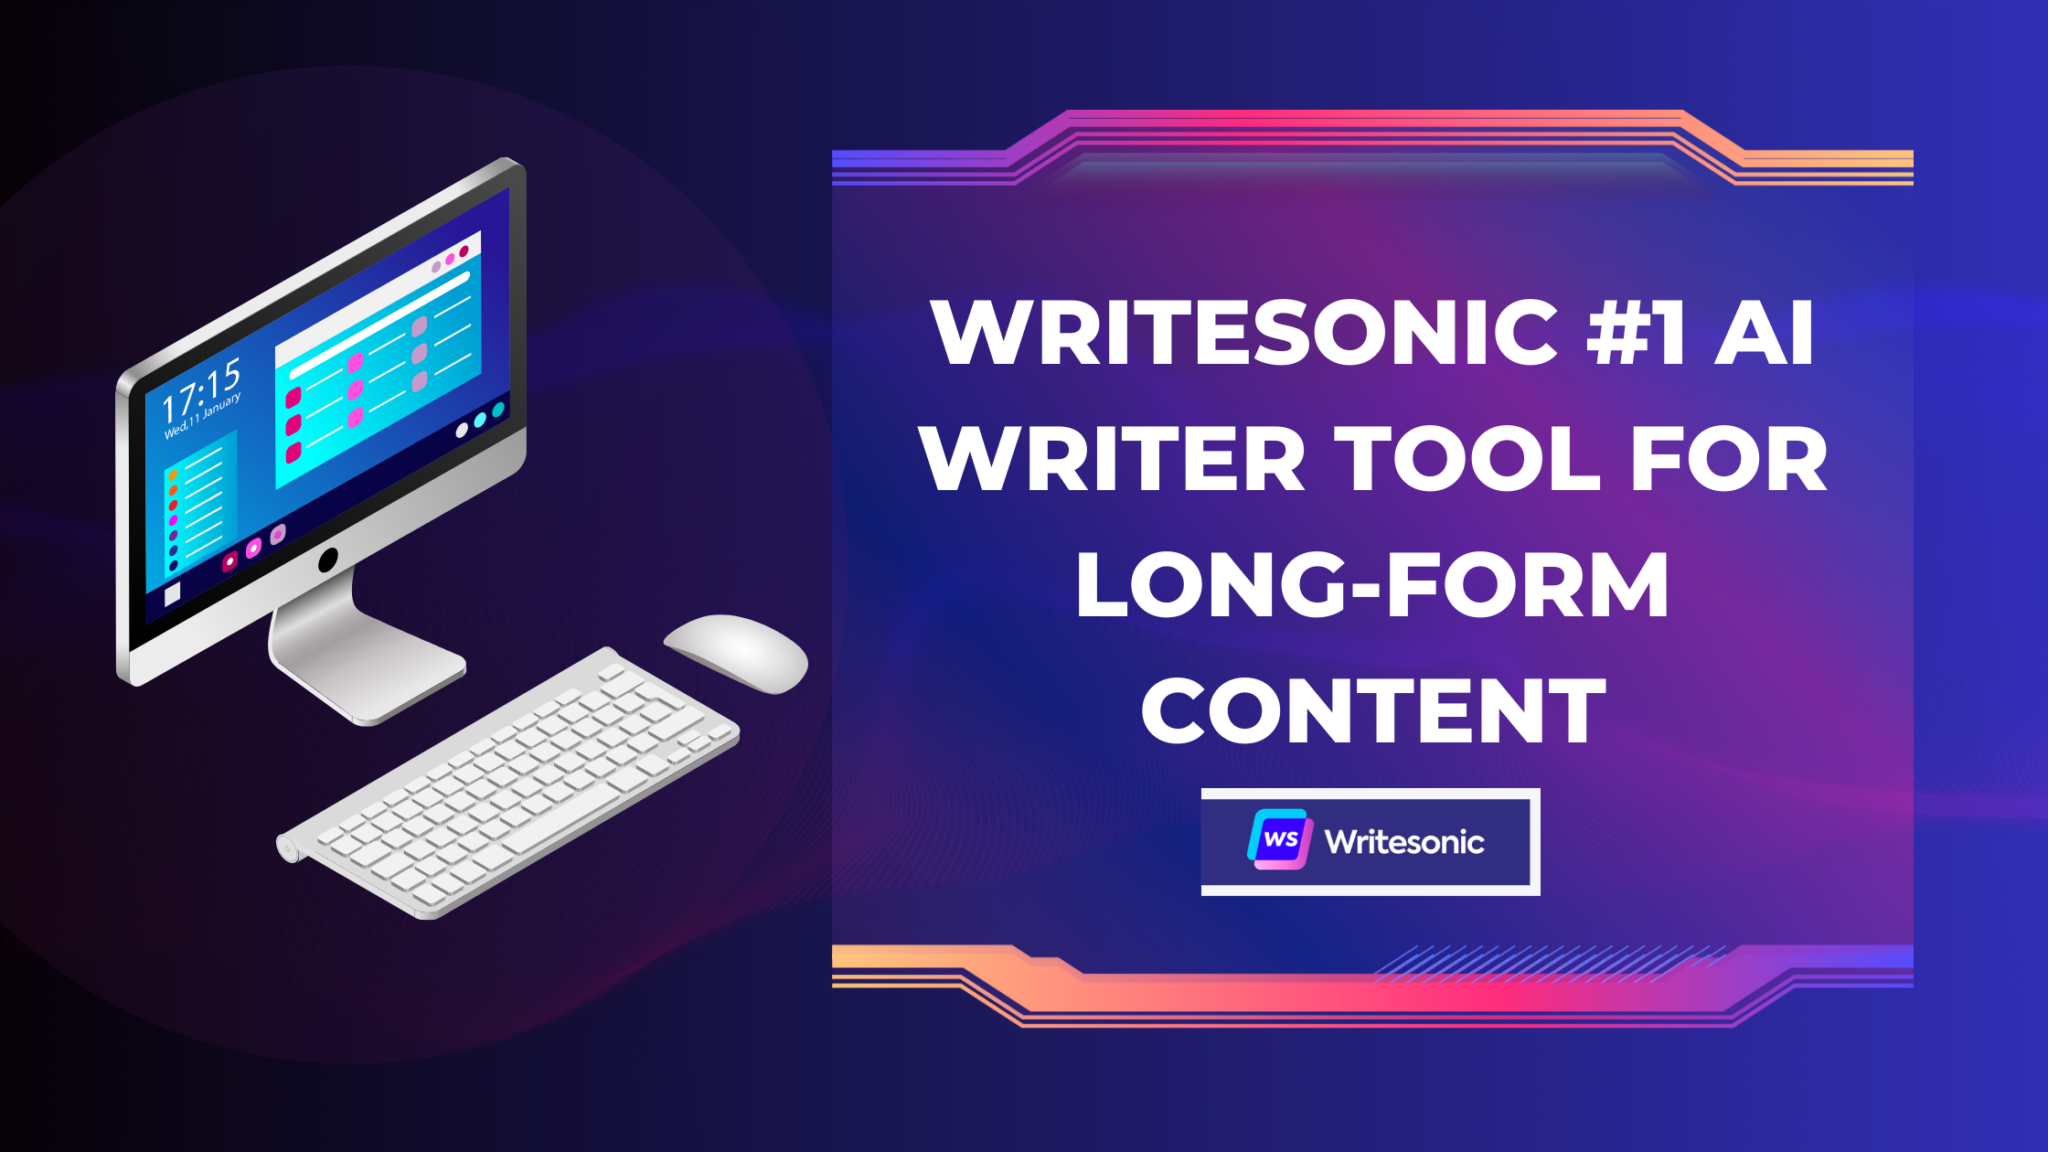 Writesonic AI is The best AI writer for long-form writing